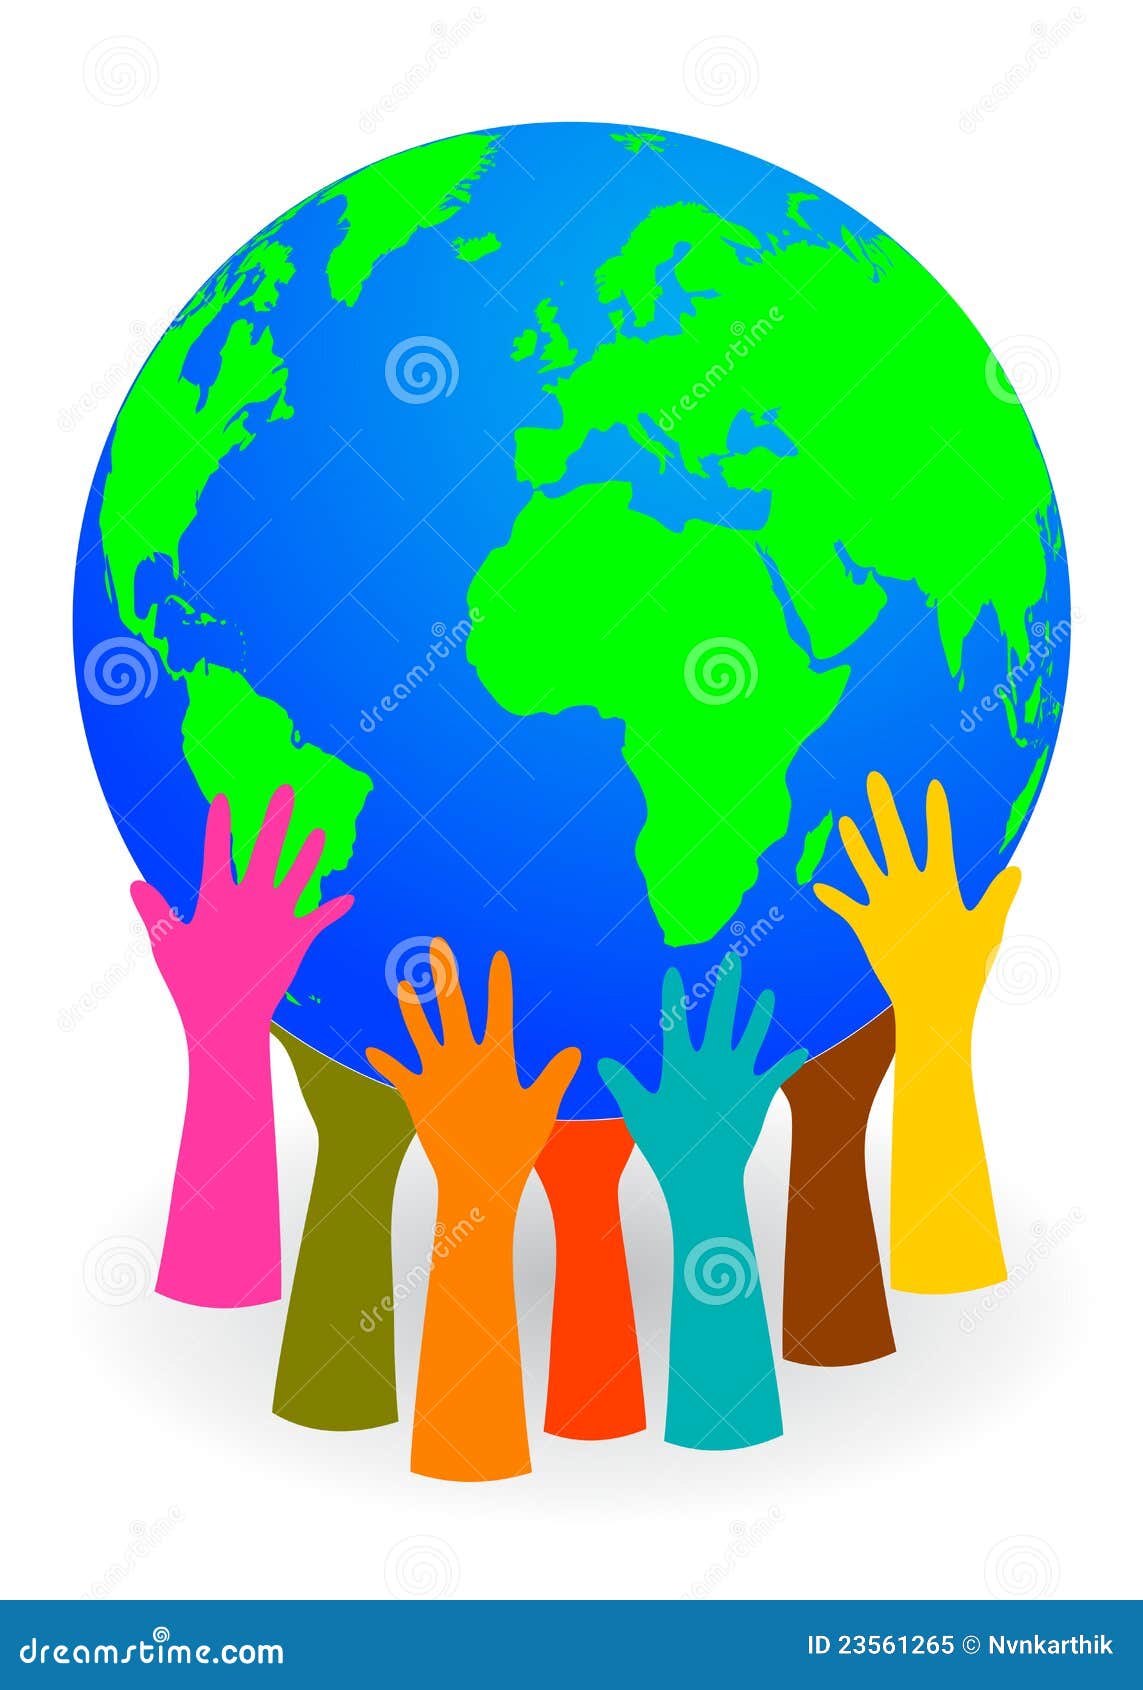 hands holding up a globe